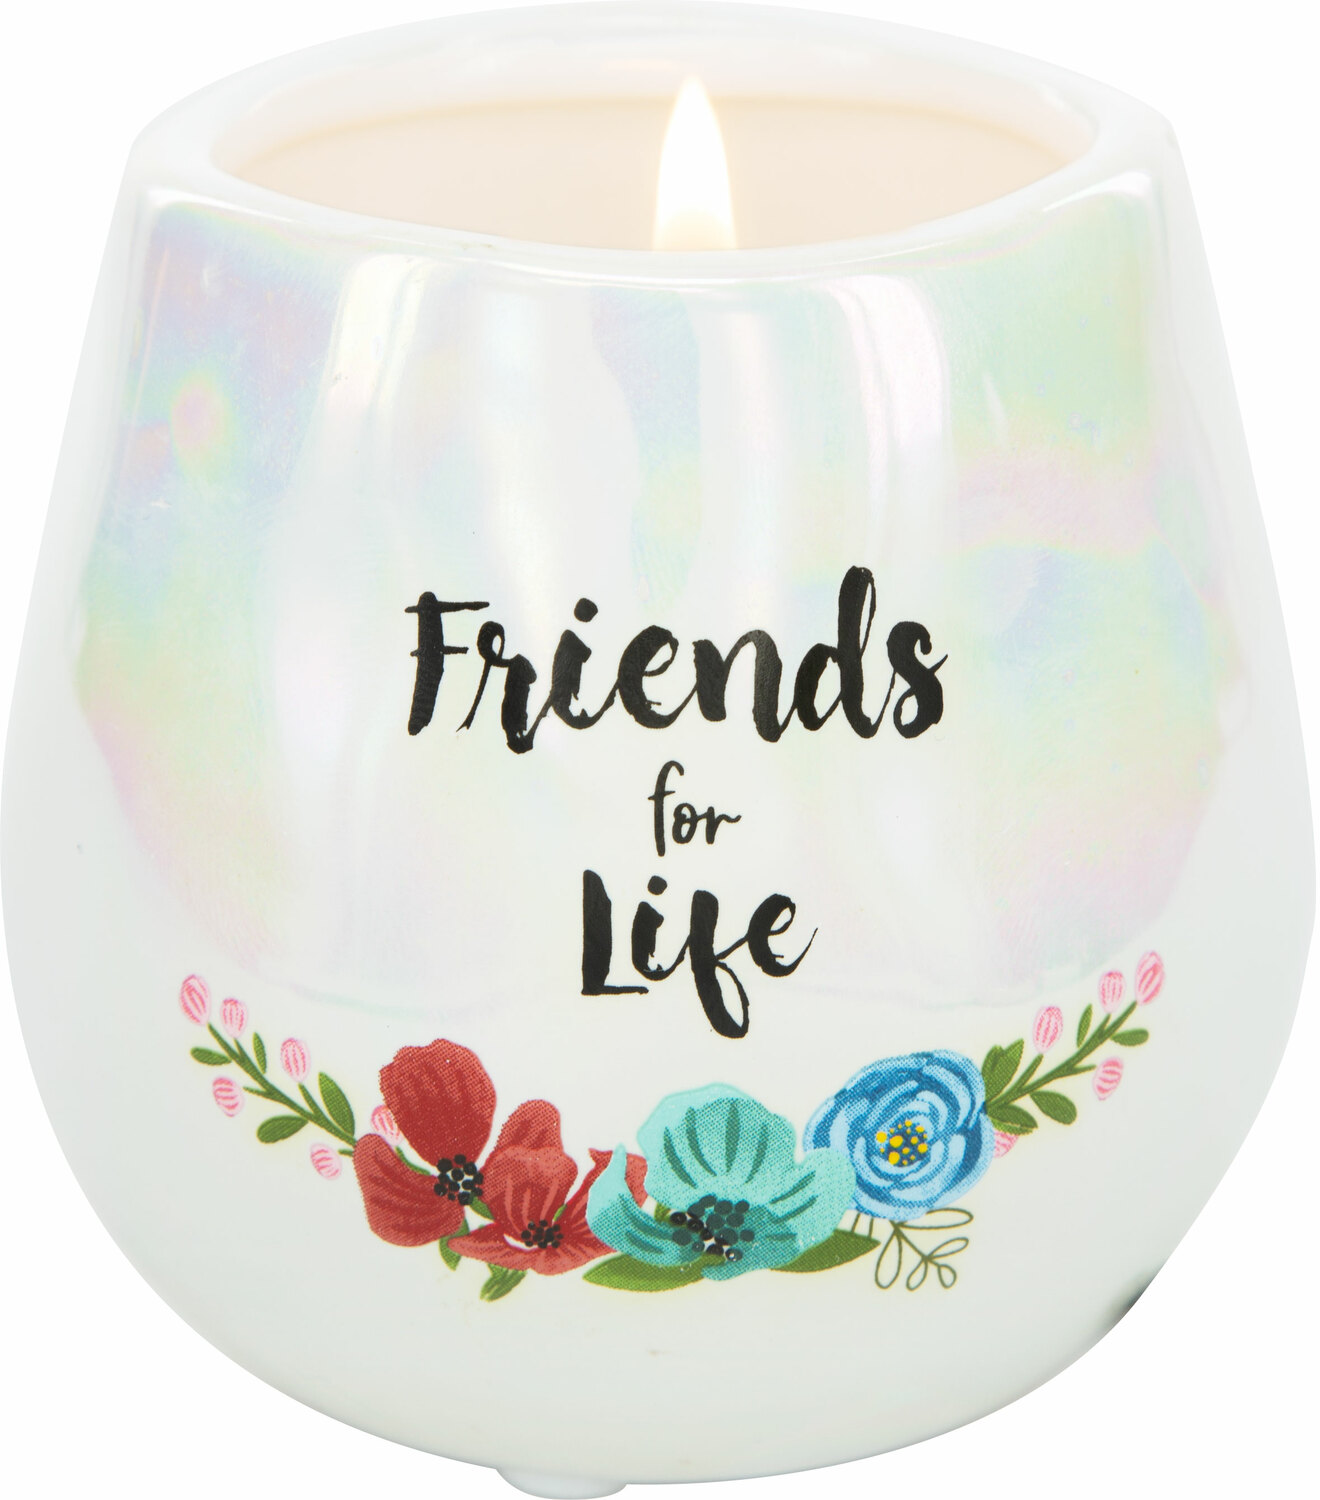 Friends by Bunches of Love - Friends - 8 oz - 100% Soy Wax Candle
Scent: Serenity